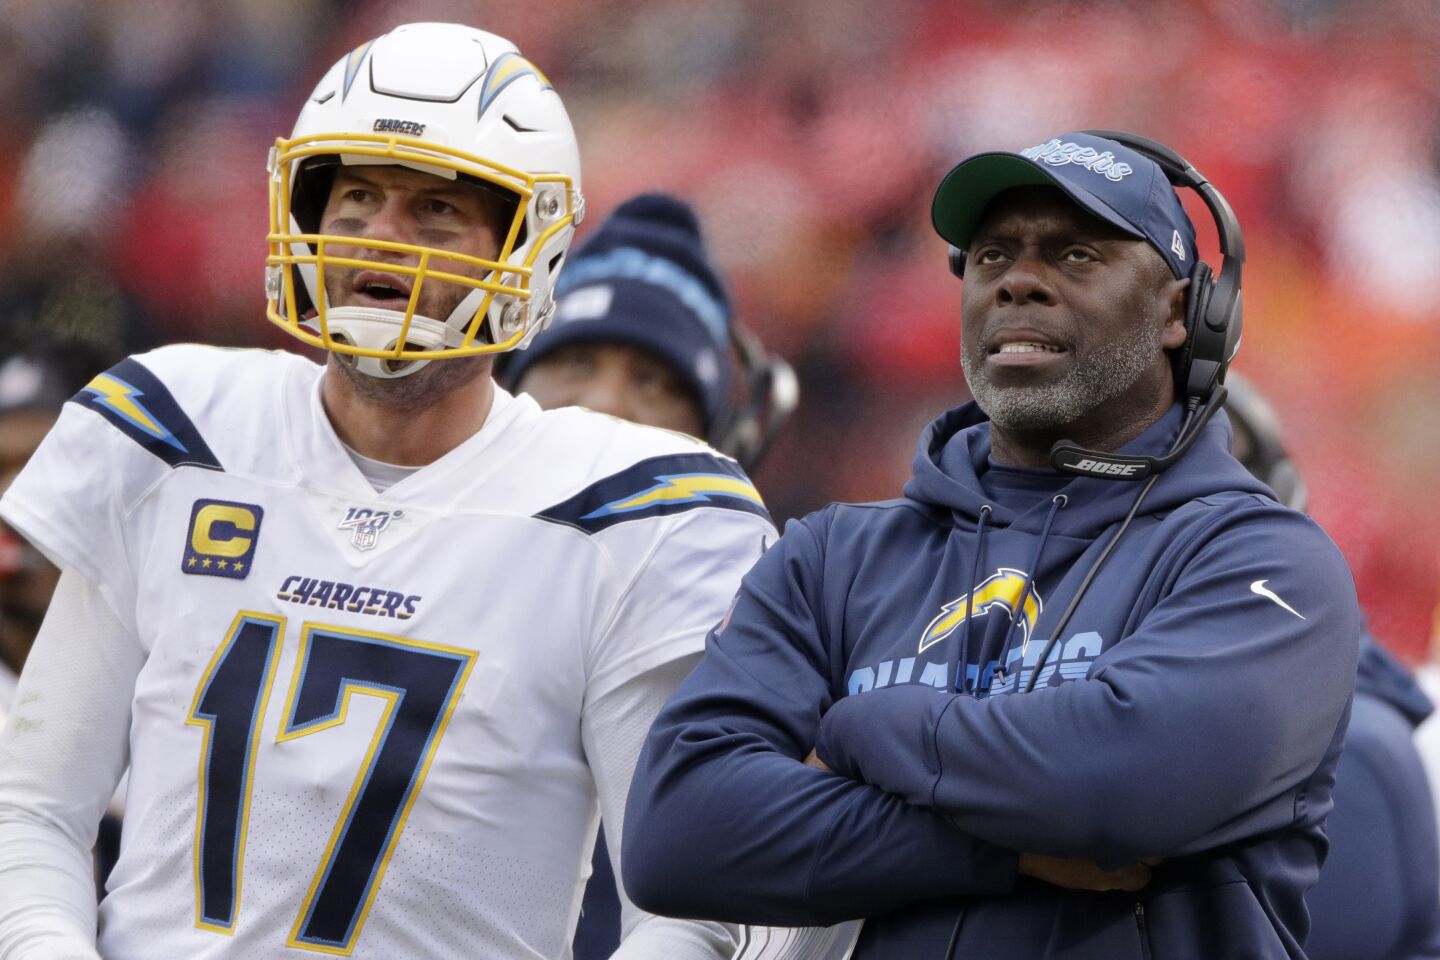 Chargers coach Anthony Lynn stands with quarterback Philip Rivers (17) during the second half of a game against the Chiefs on Dec. 29.